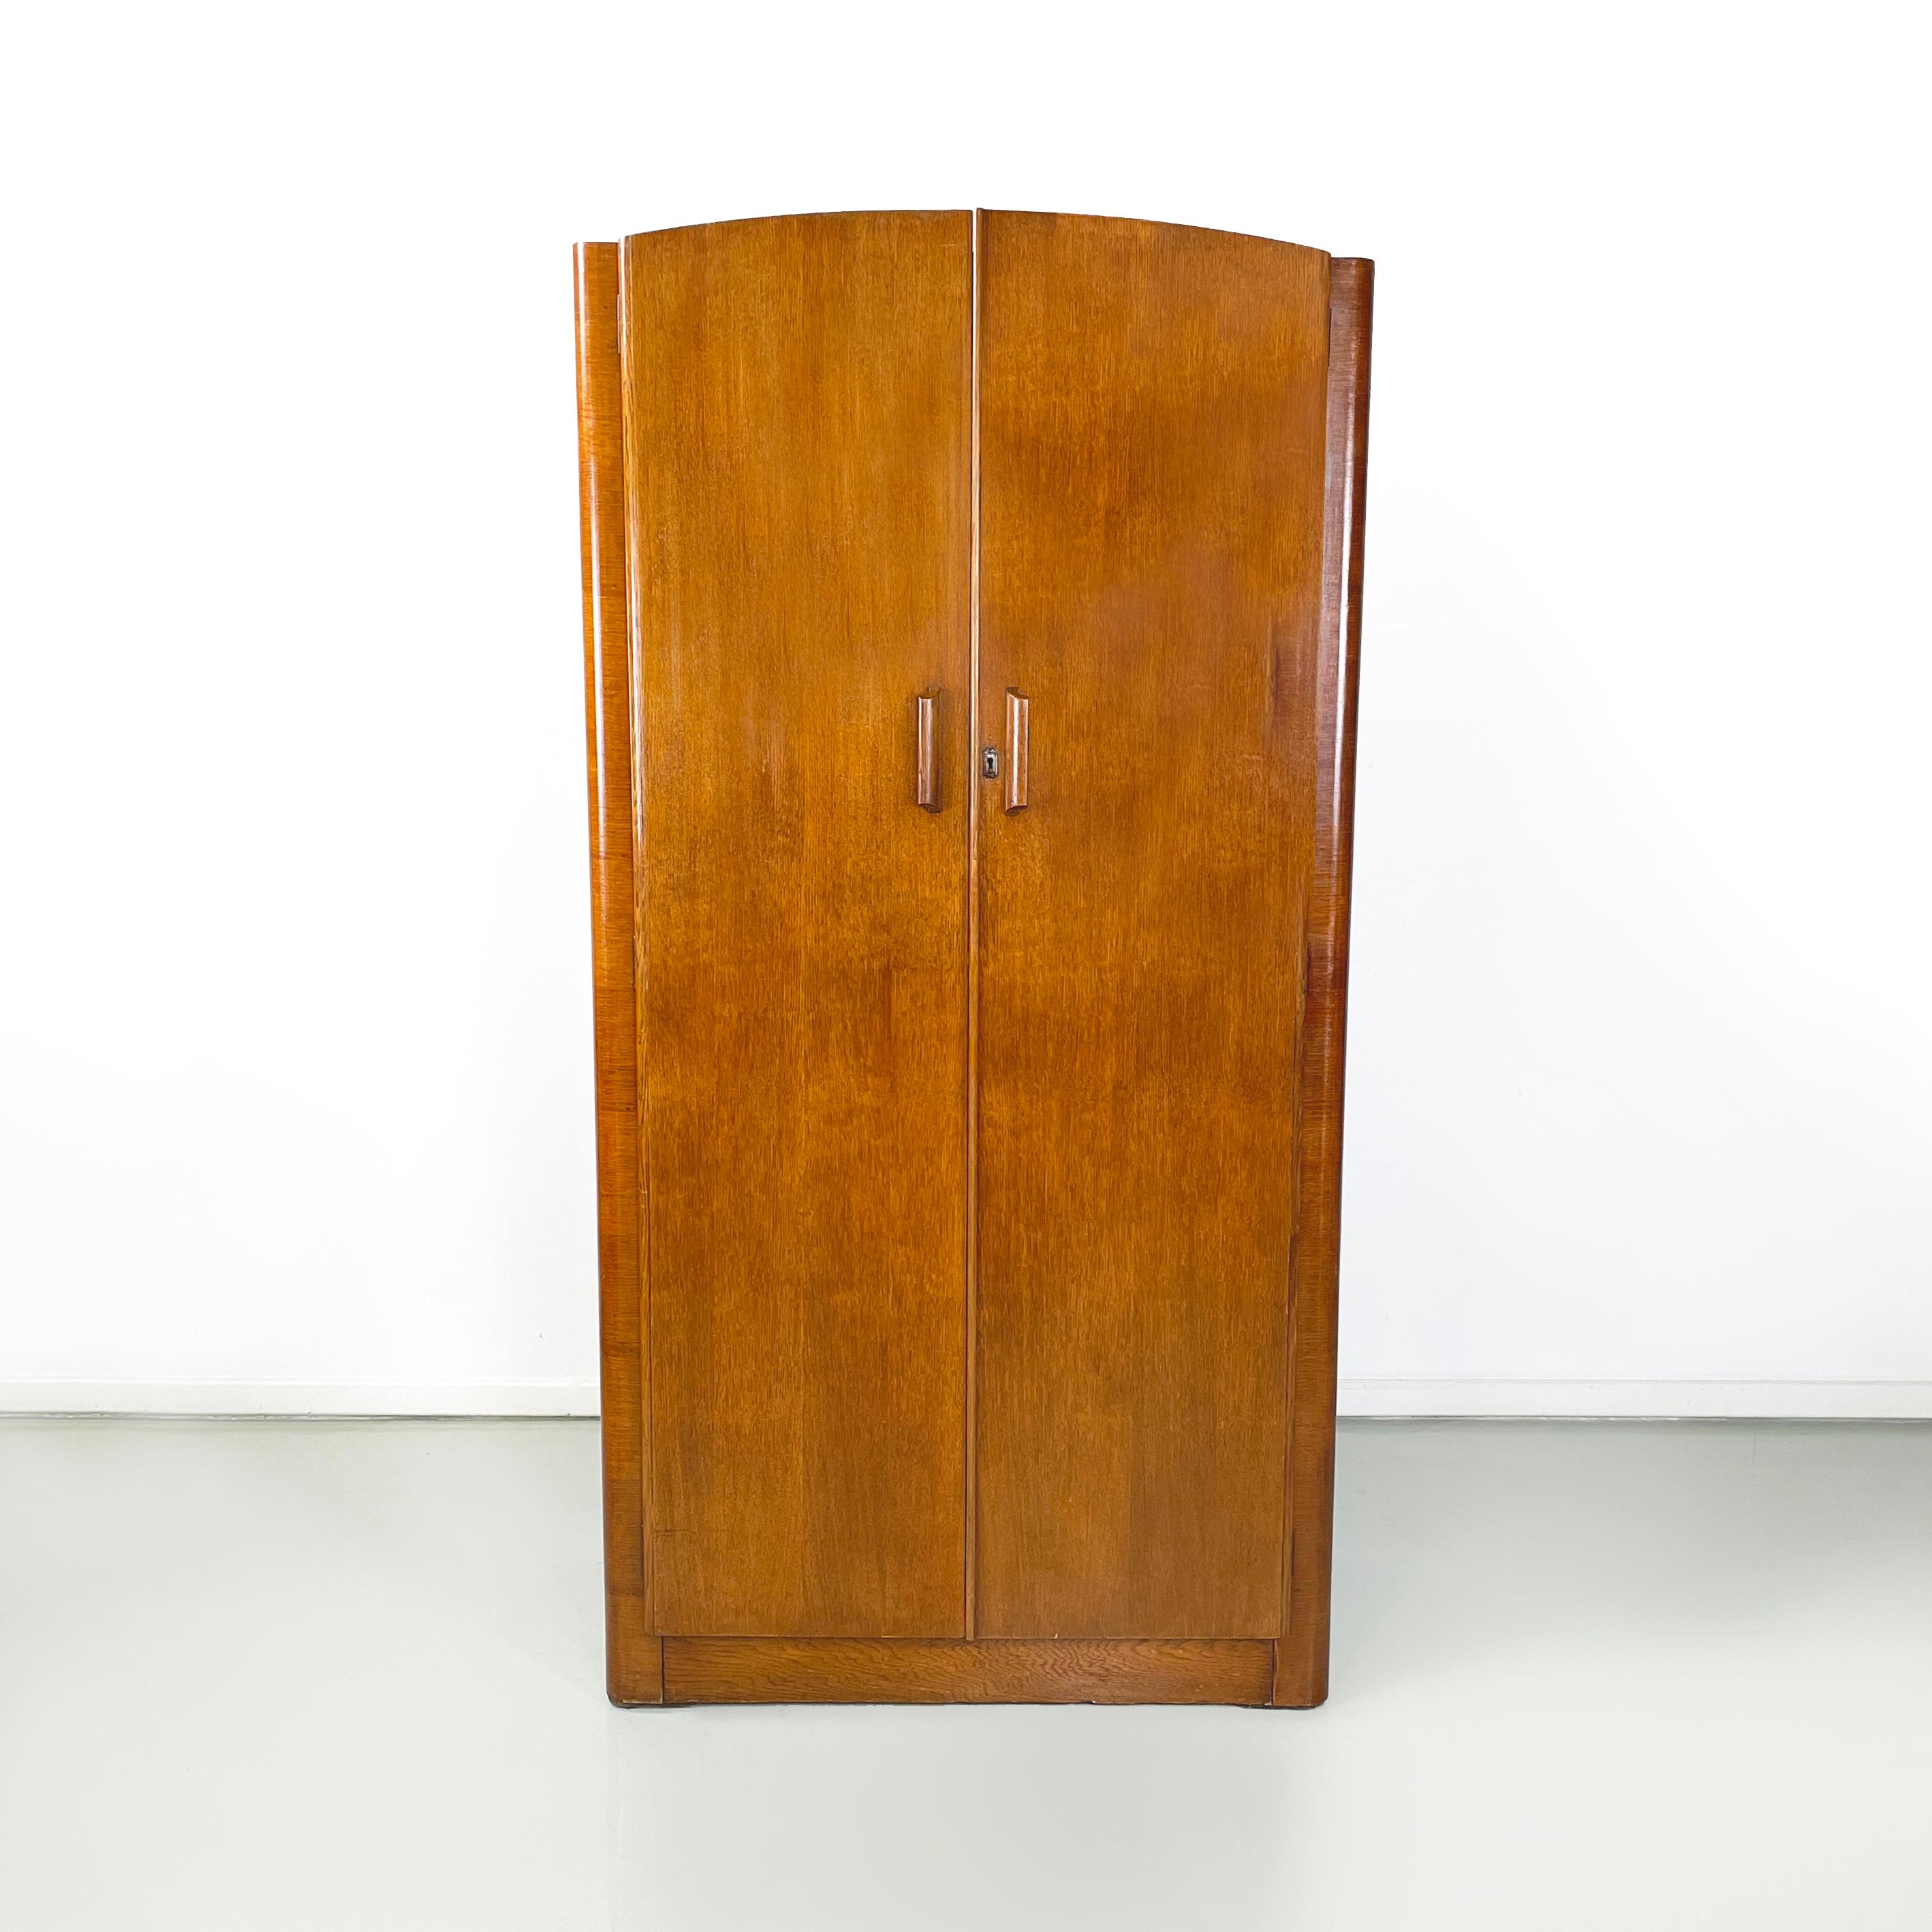 Italian art deco style Wooden wardrobe with mirror and shelves, 1950s
Wardrobe entirely in solid wood with double hinged door. Inside there are two spaces. On the left there is an extractable metal coat hanger with a wooden rod for ties. On the